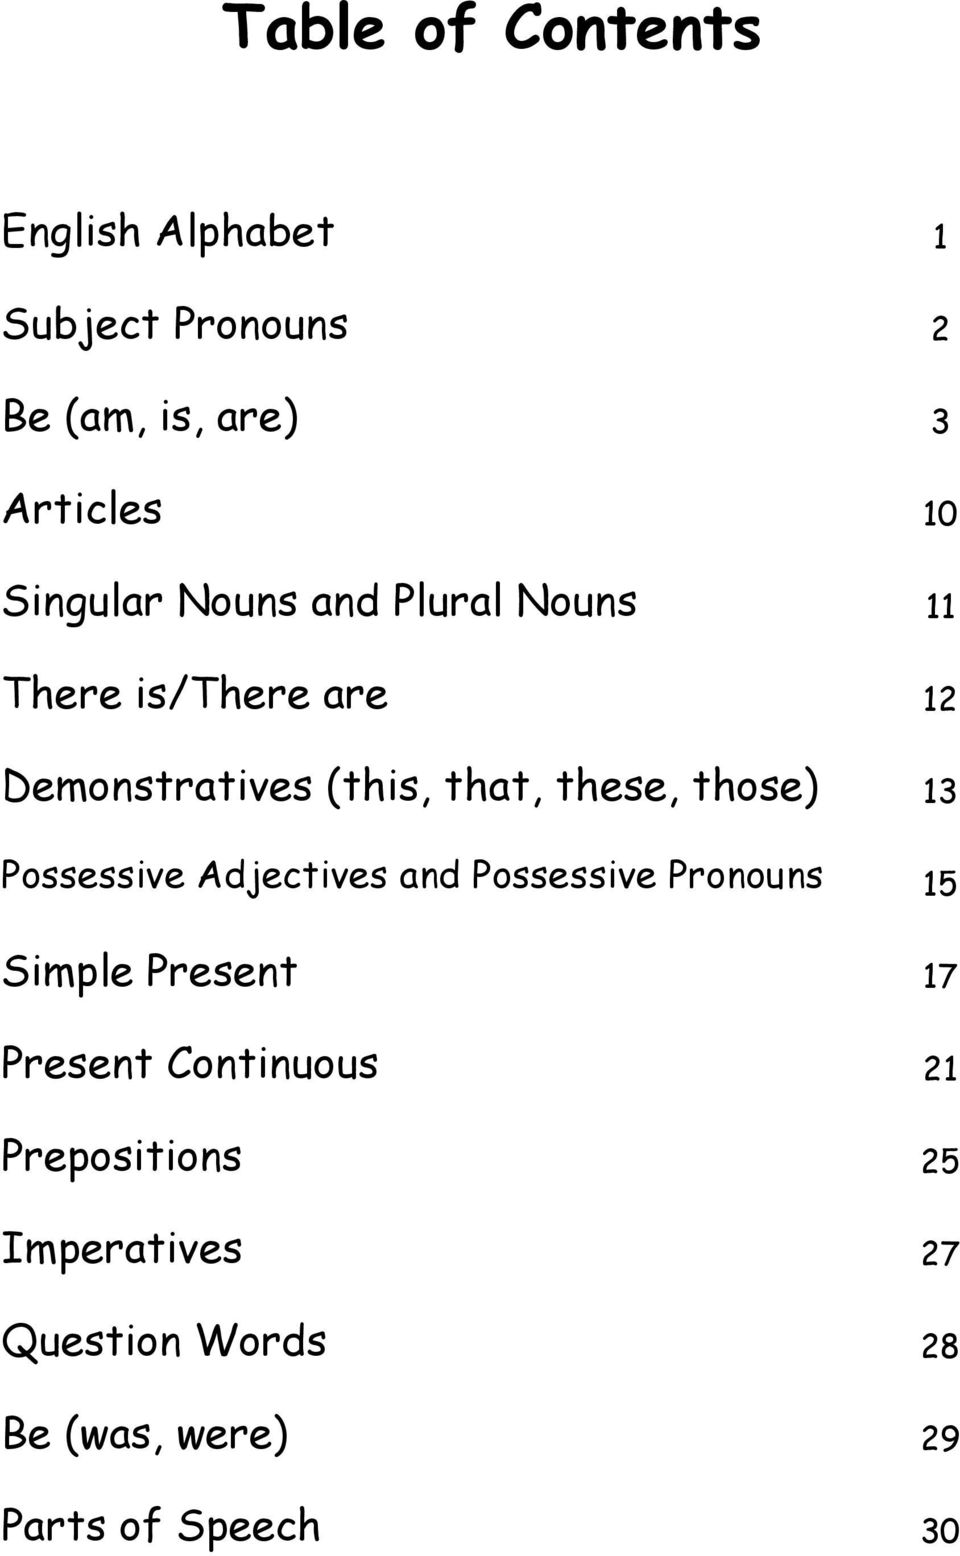 these, those) 13 Possessive Adjectives and Possessive Pronouns 15 Simple Present 17